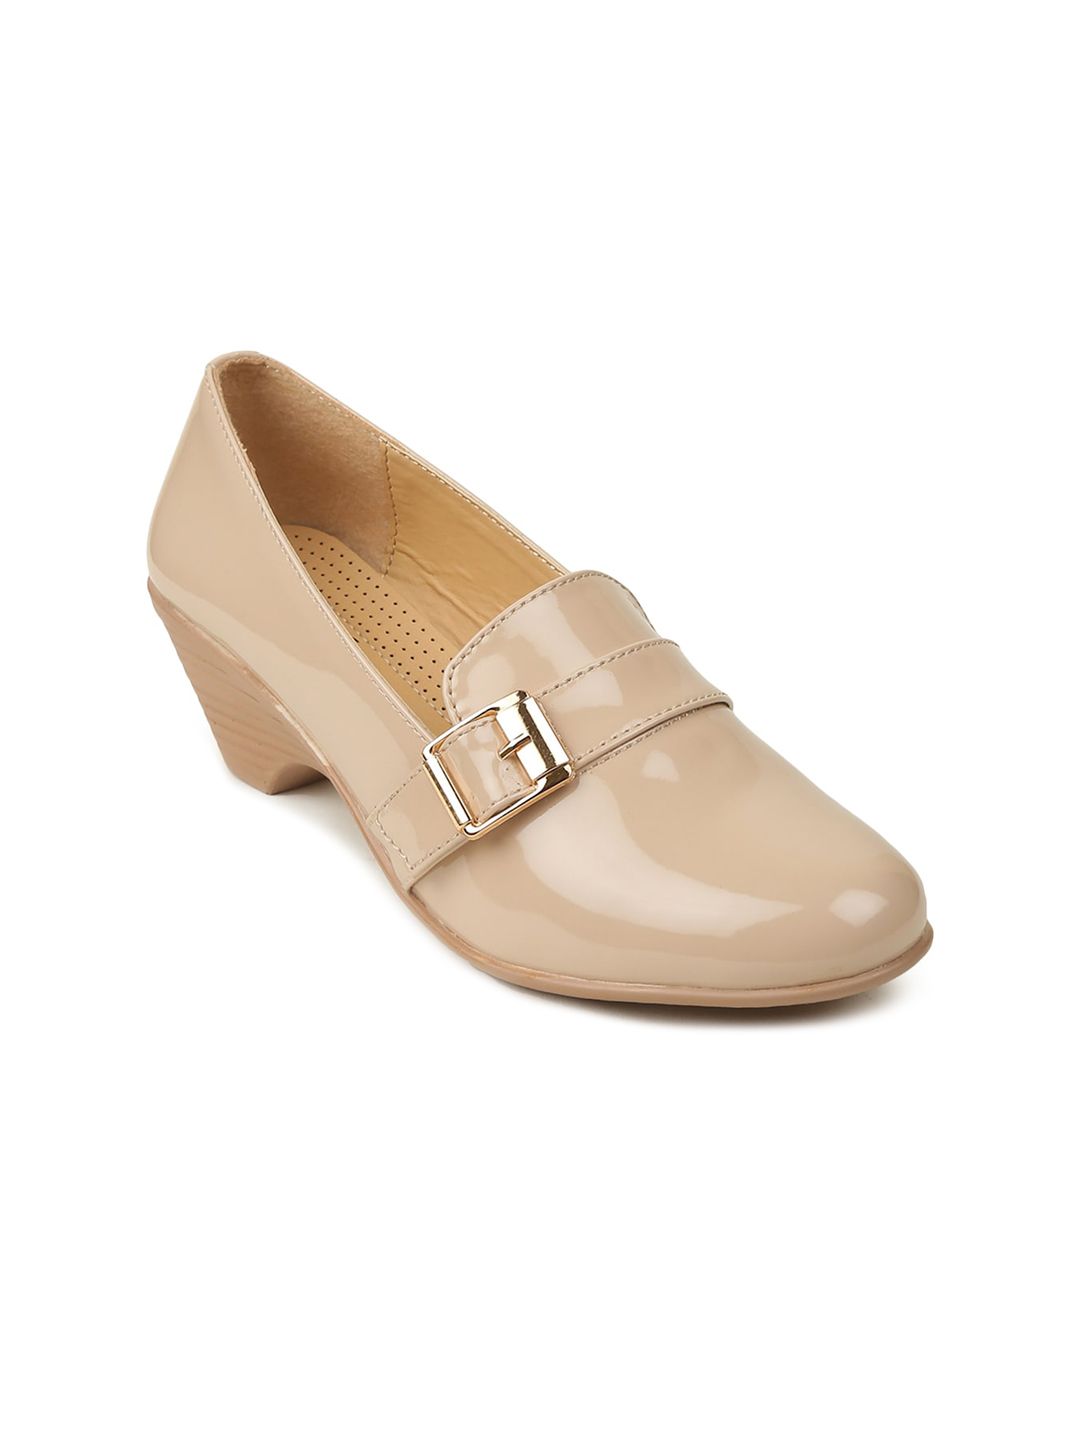 VALIOSAA Cream-Coloured Work Wedge Pumps with Buckles Price in India